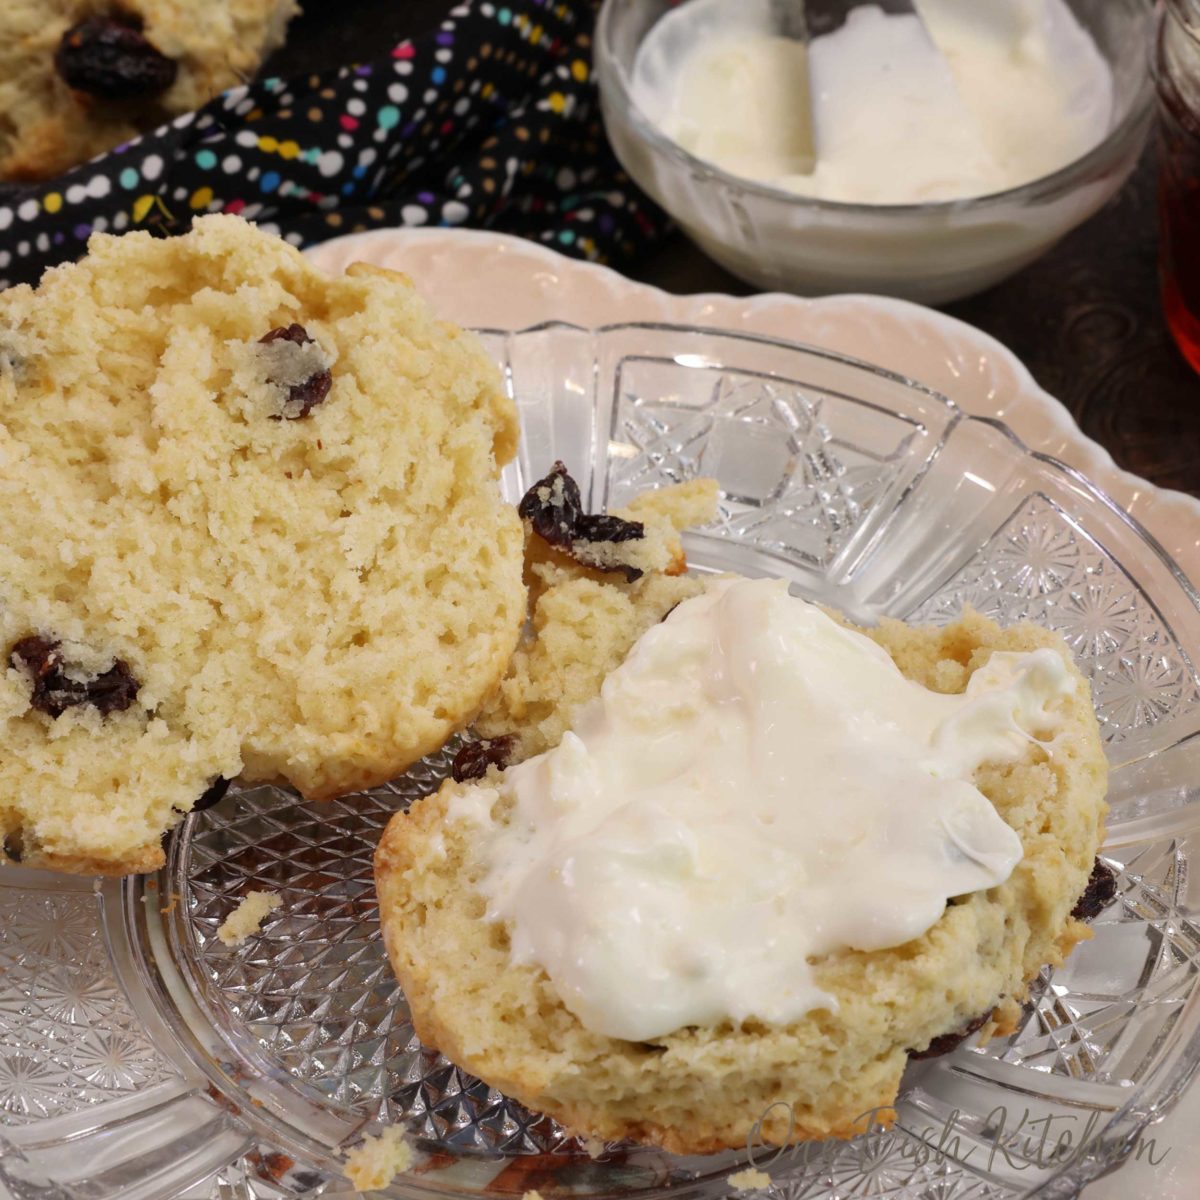 a raisin scone topped with clotted cream